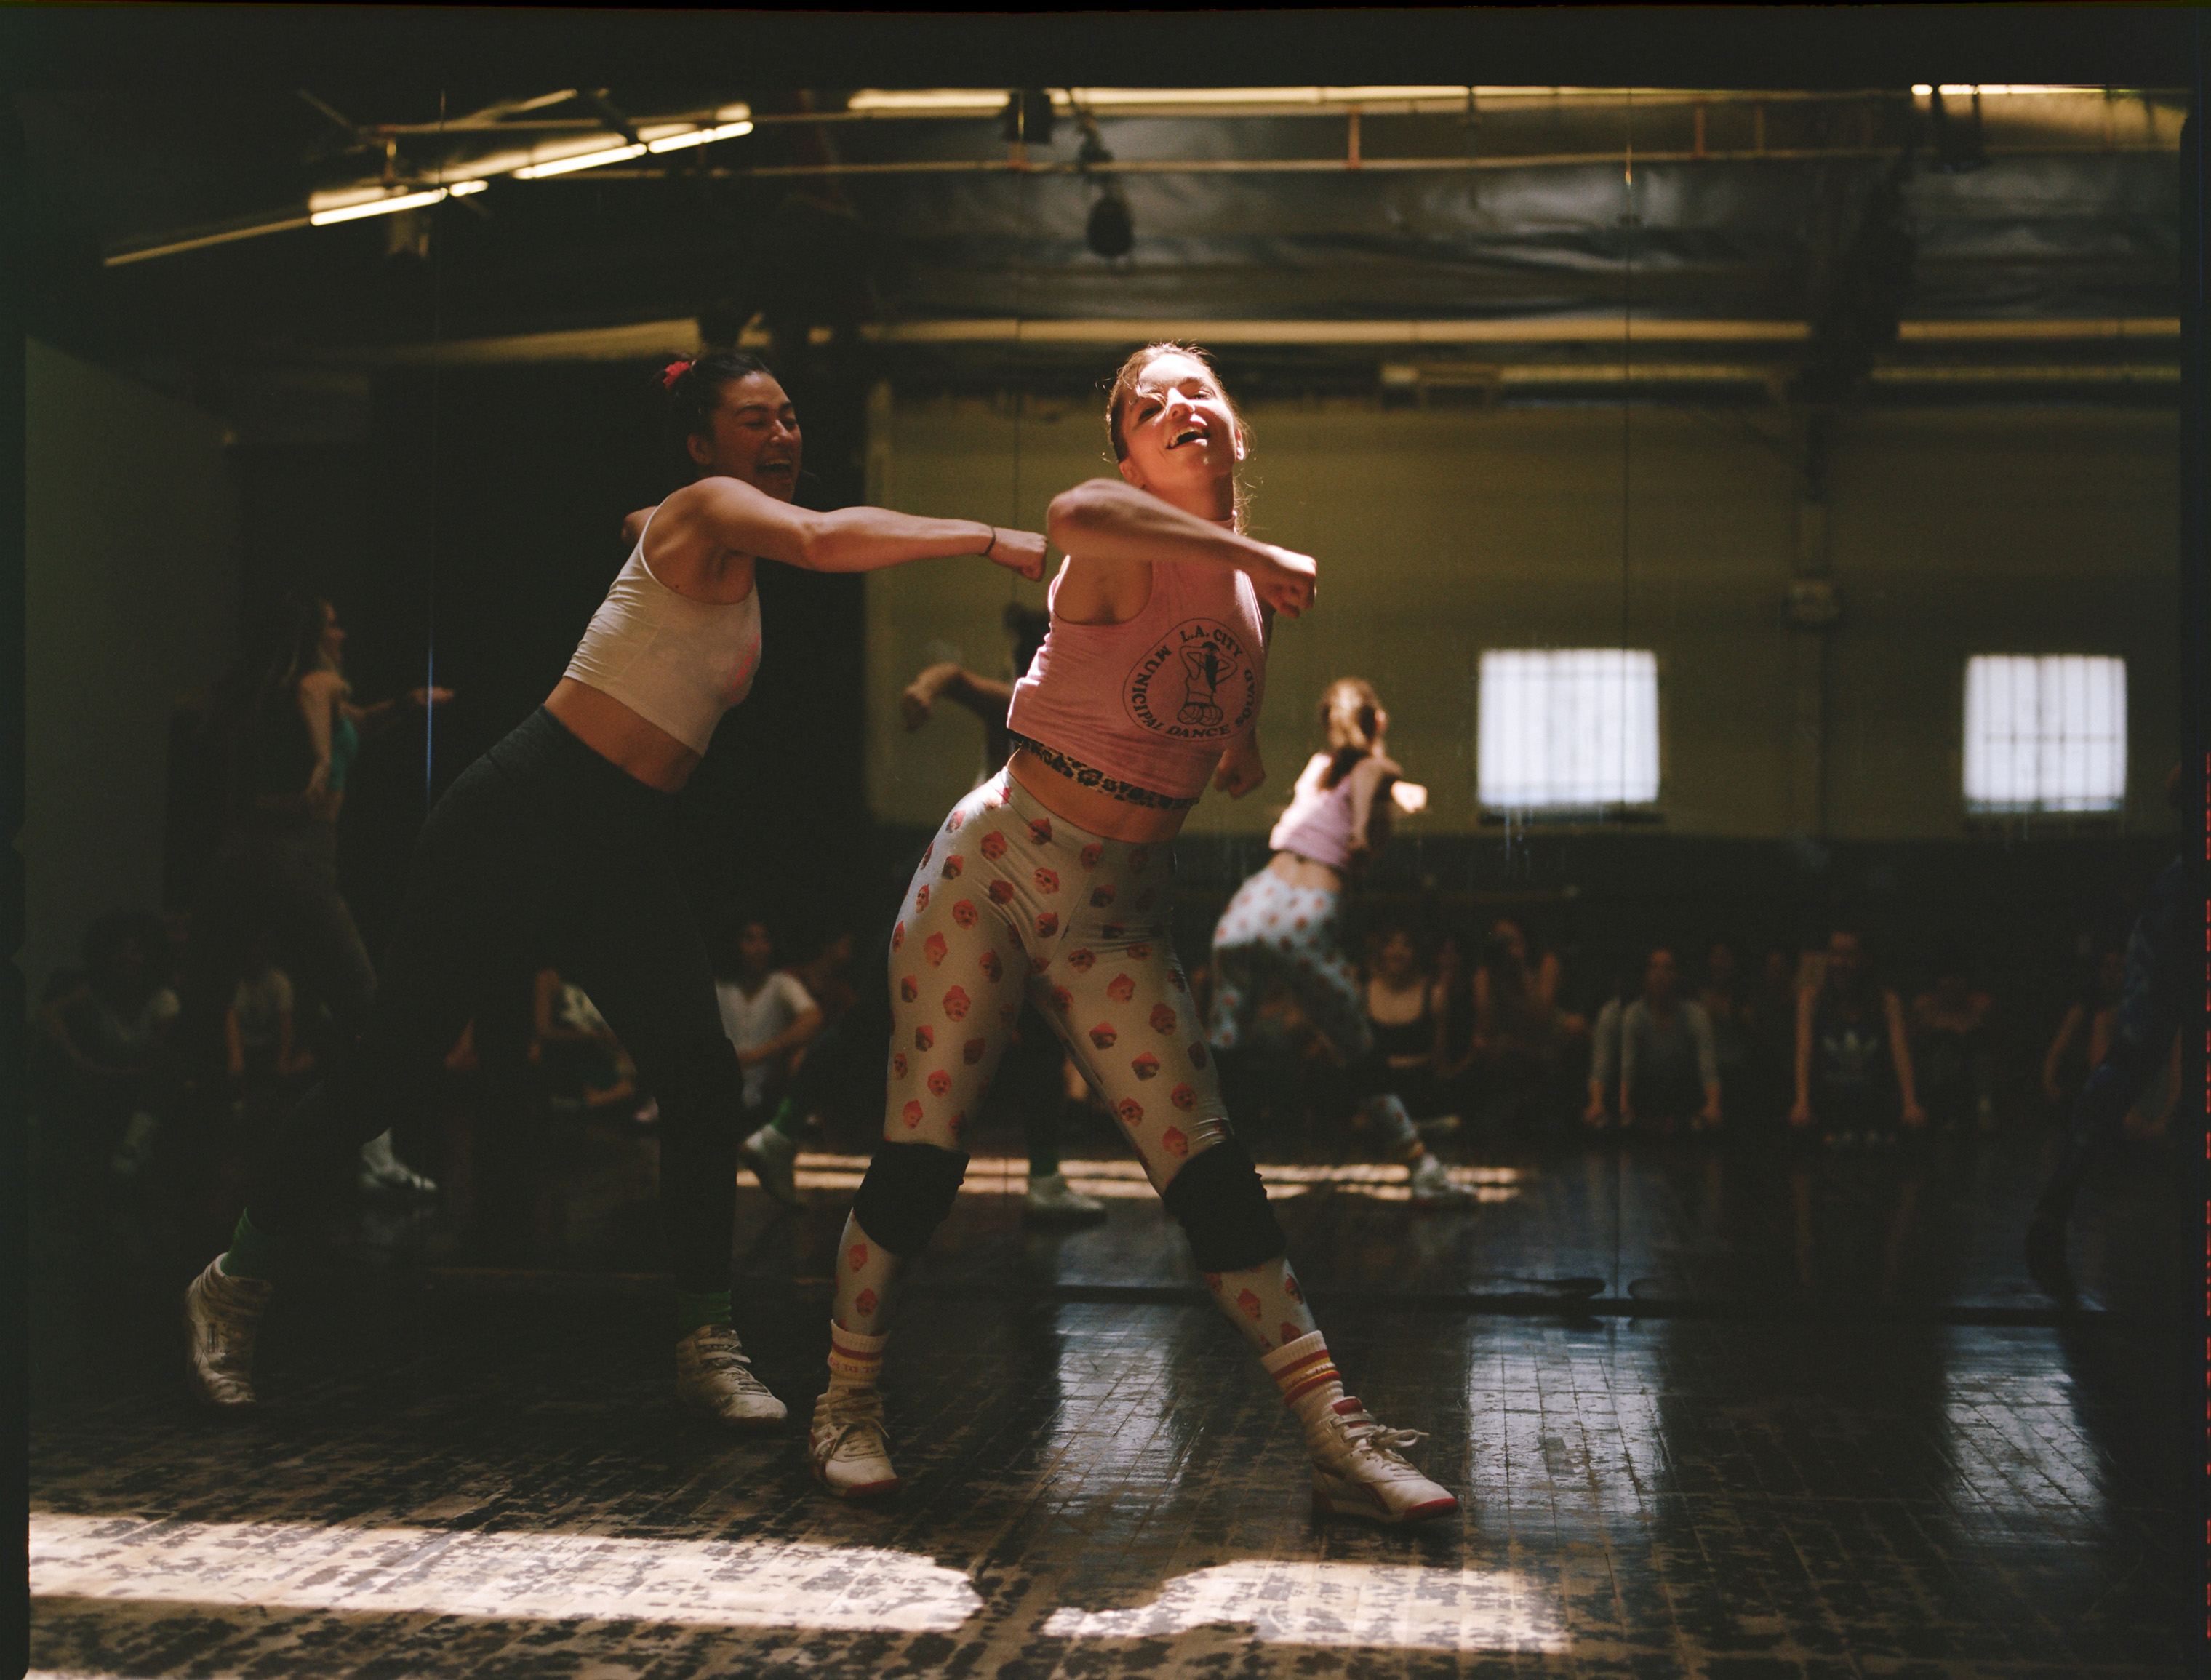 Bonnie Hernandez and Angela Trimbur choreograph the squad’s routines together. (Bella Newman for TIME)